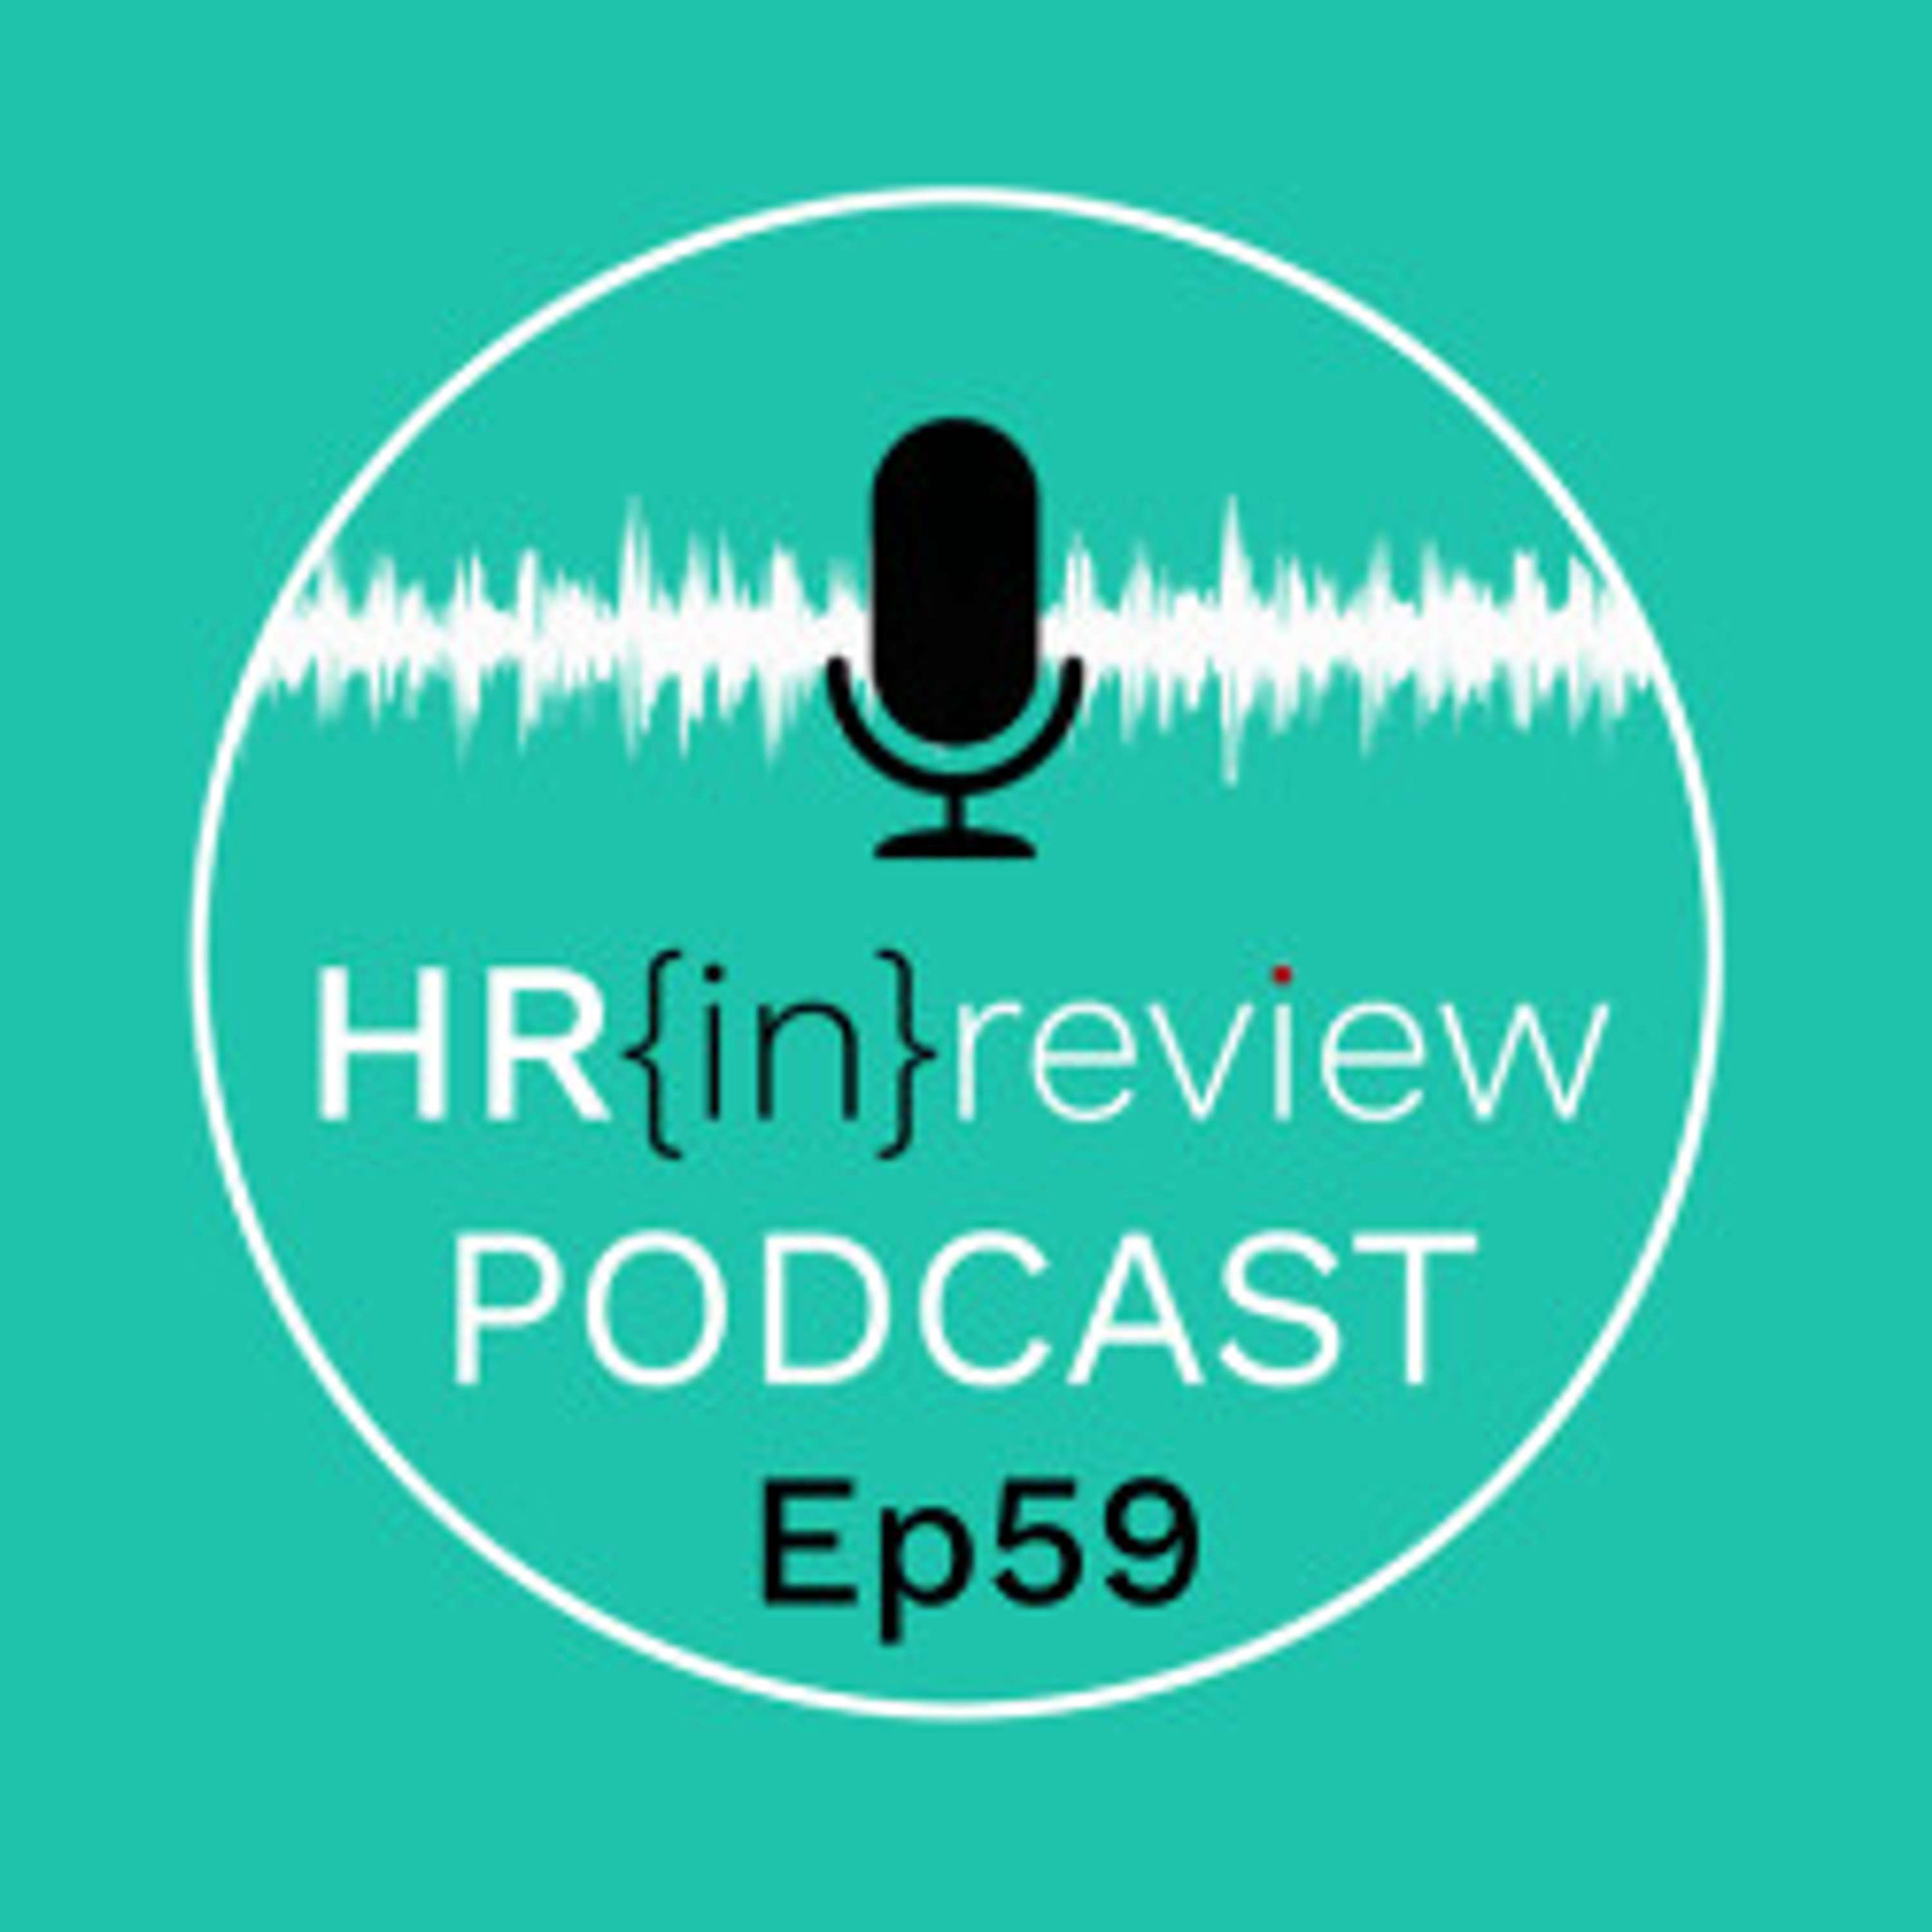 Financial Wellbeing and HR with Ruth Handcock